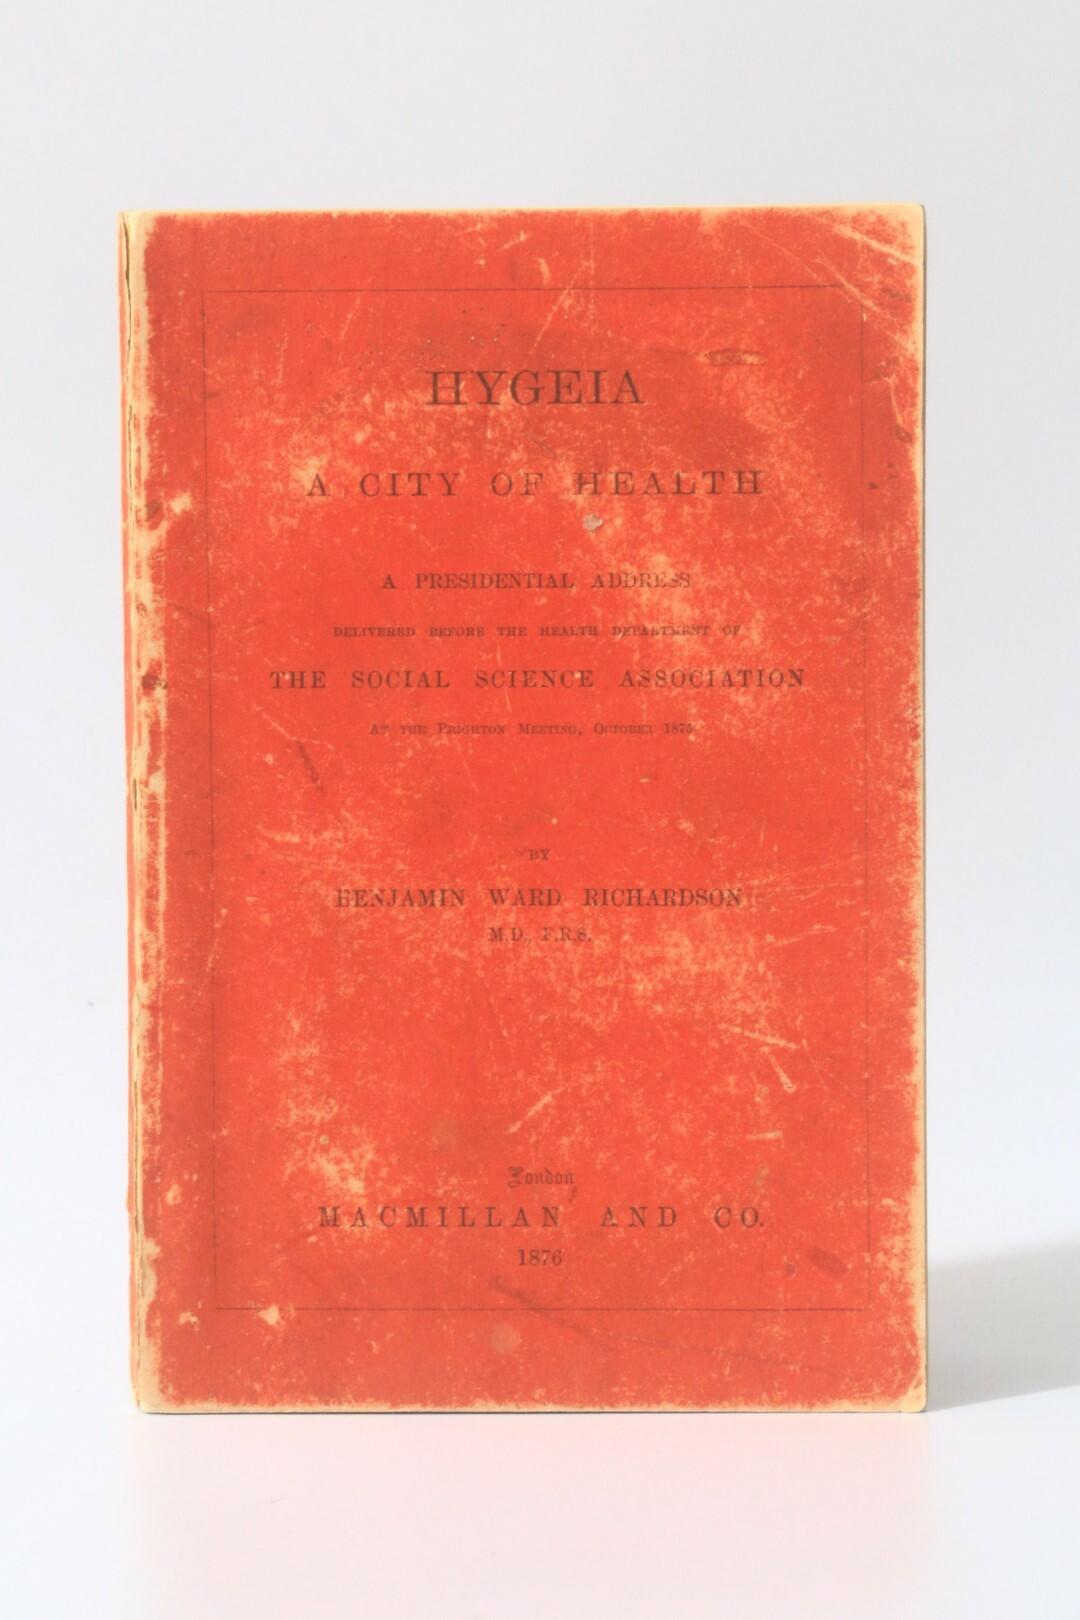 Benjamin Ward Richardson - Hygeia: A City of Health: A Presidential Address Delivered Before the Health Department of the Social Science Association at the Brighton Meeting, October 1875 - Macmillan and Co., 1876, Firist.